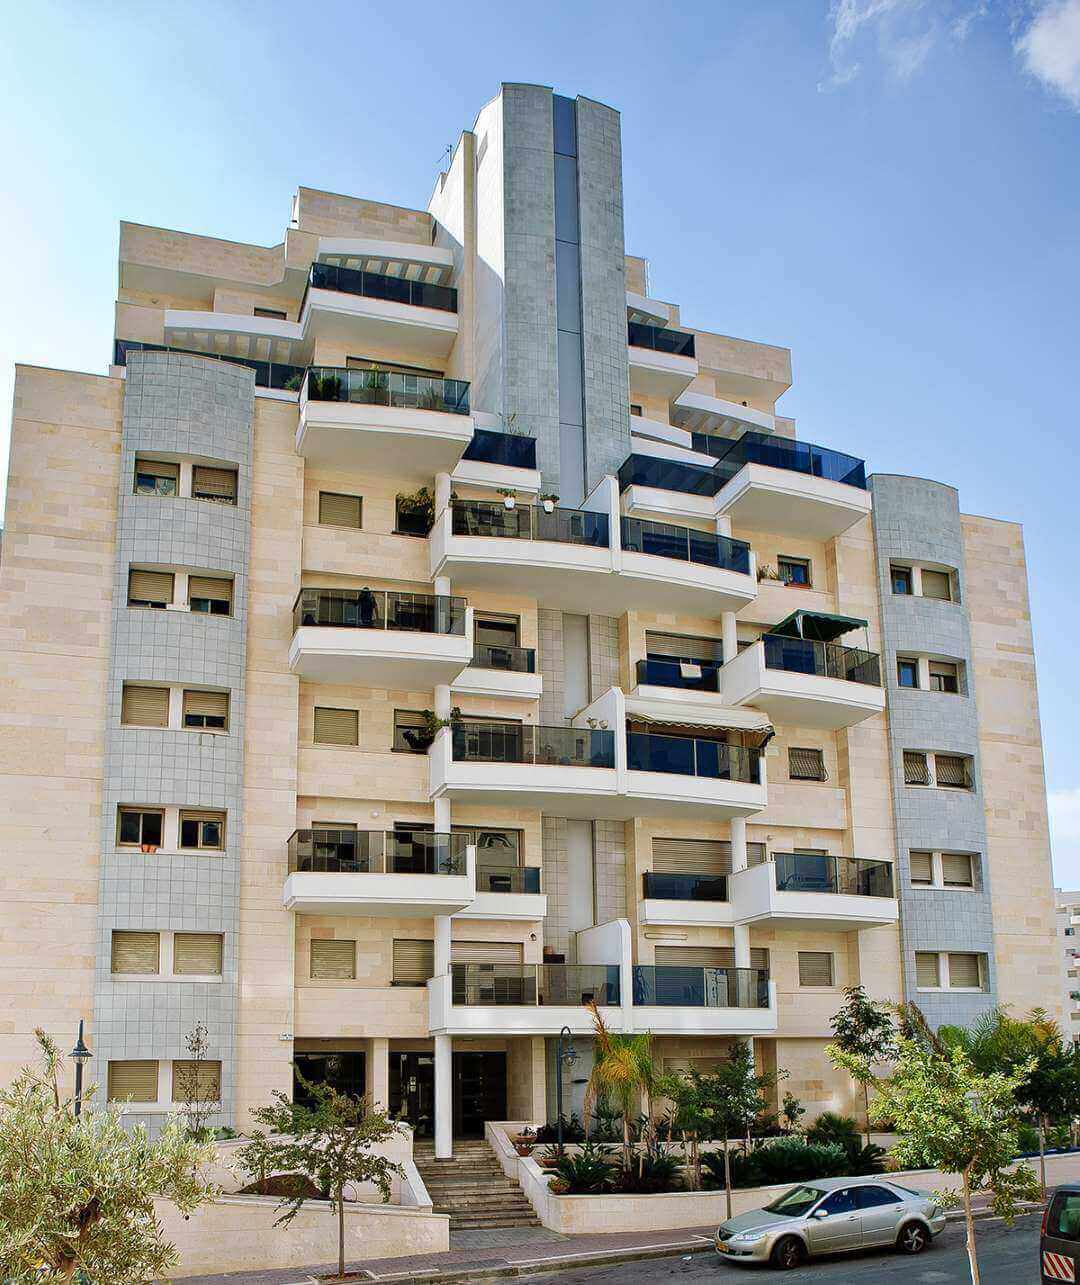 Photograph of a building in the Medorgi ayalon project in Holon